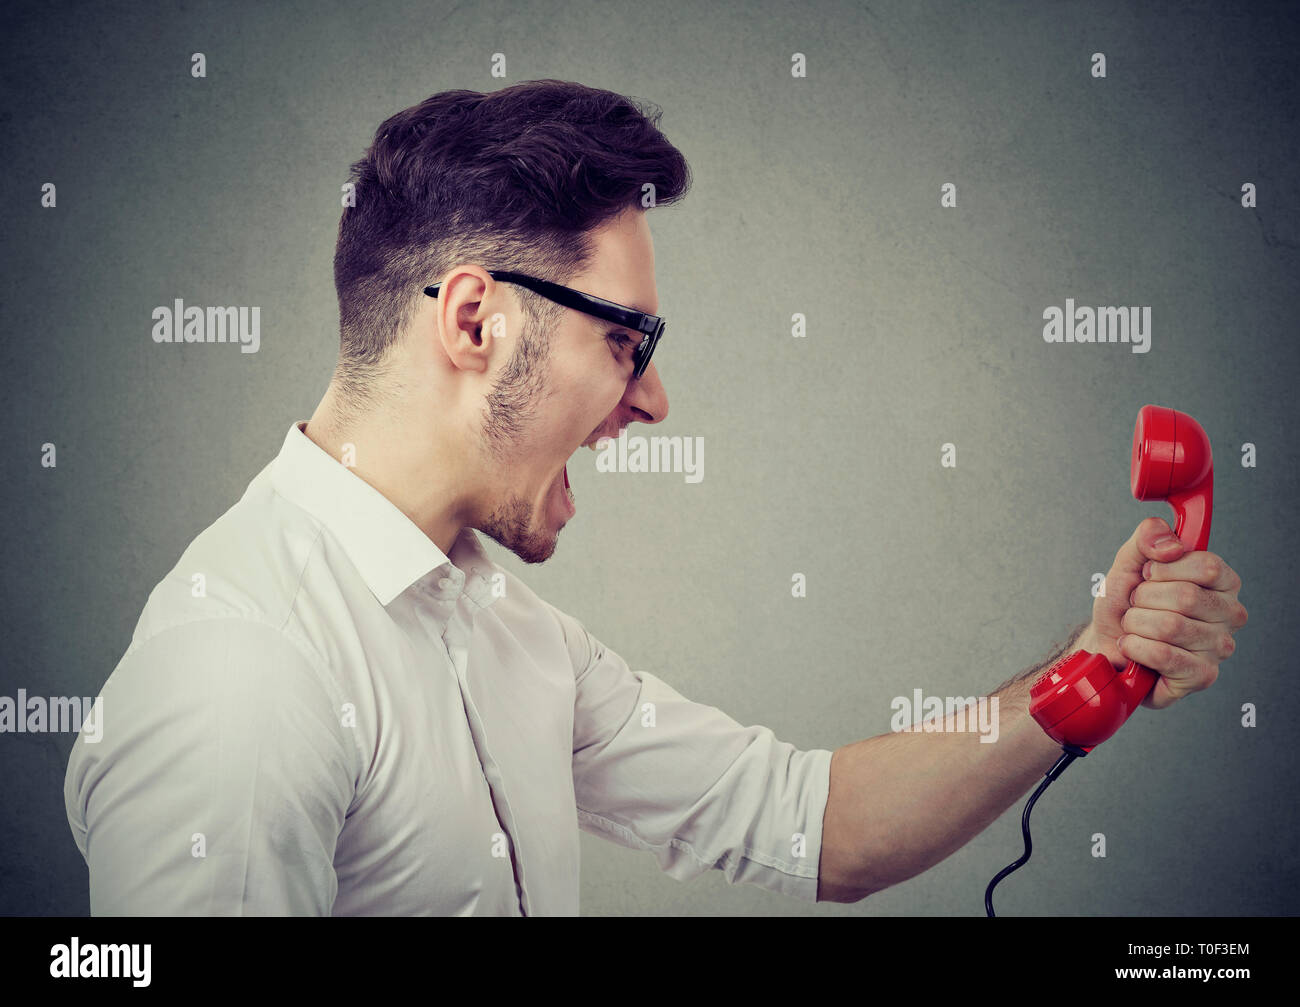 Angry business man yelling on a red telephone Stock Photo